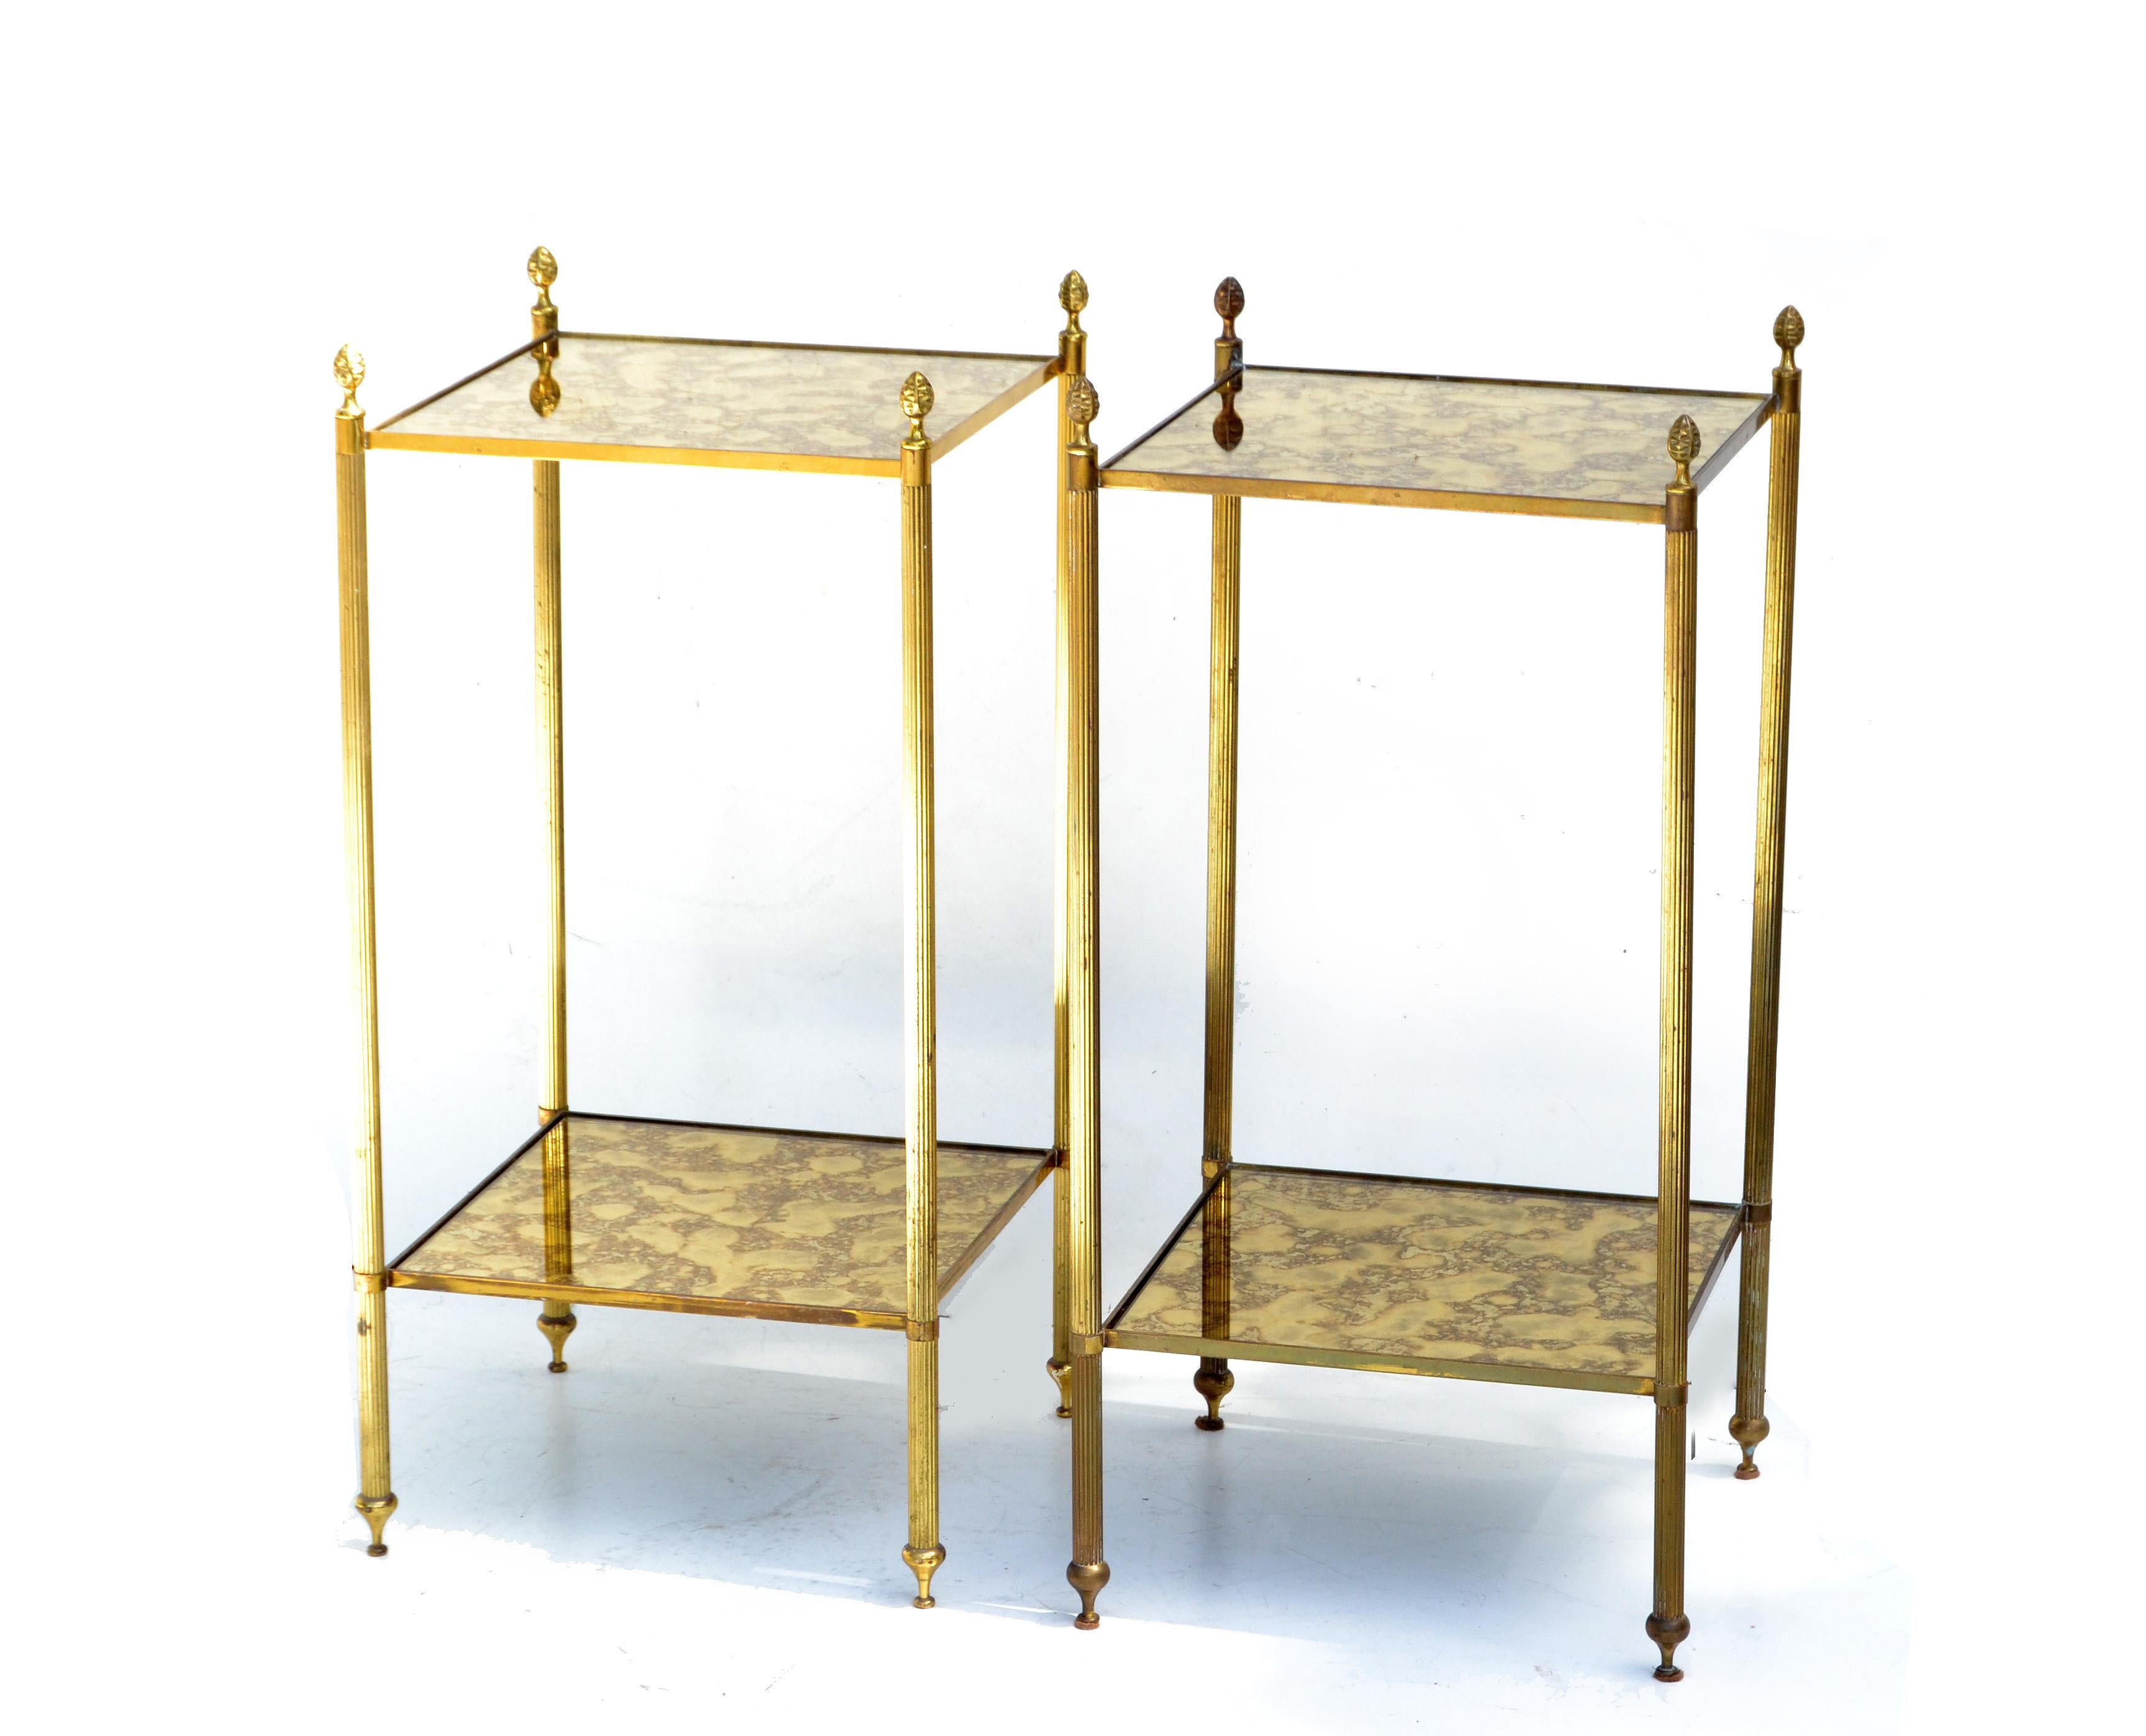 Pair of Maison Baguès French neoclassical side tables.
2-tier brass, bronze and gold cloudy mirrored glass tops.
Mirrored Glass measures: 11.5 x 11.5 inches.